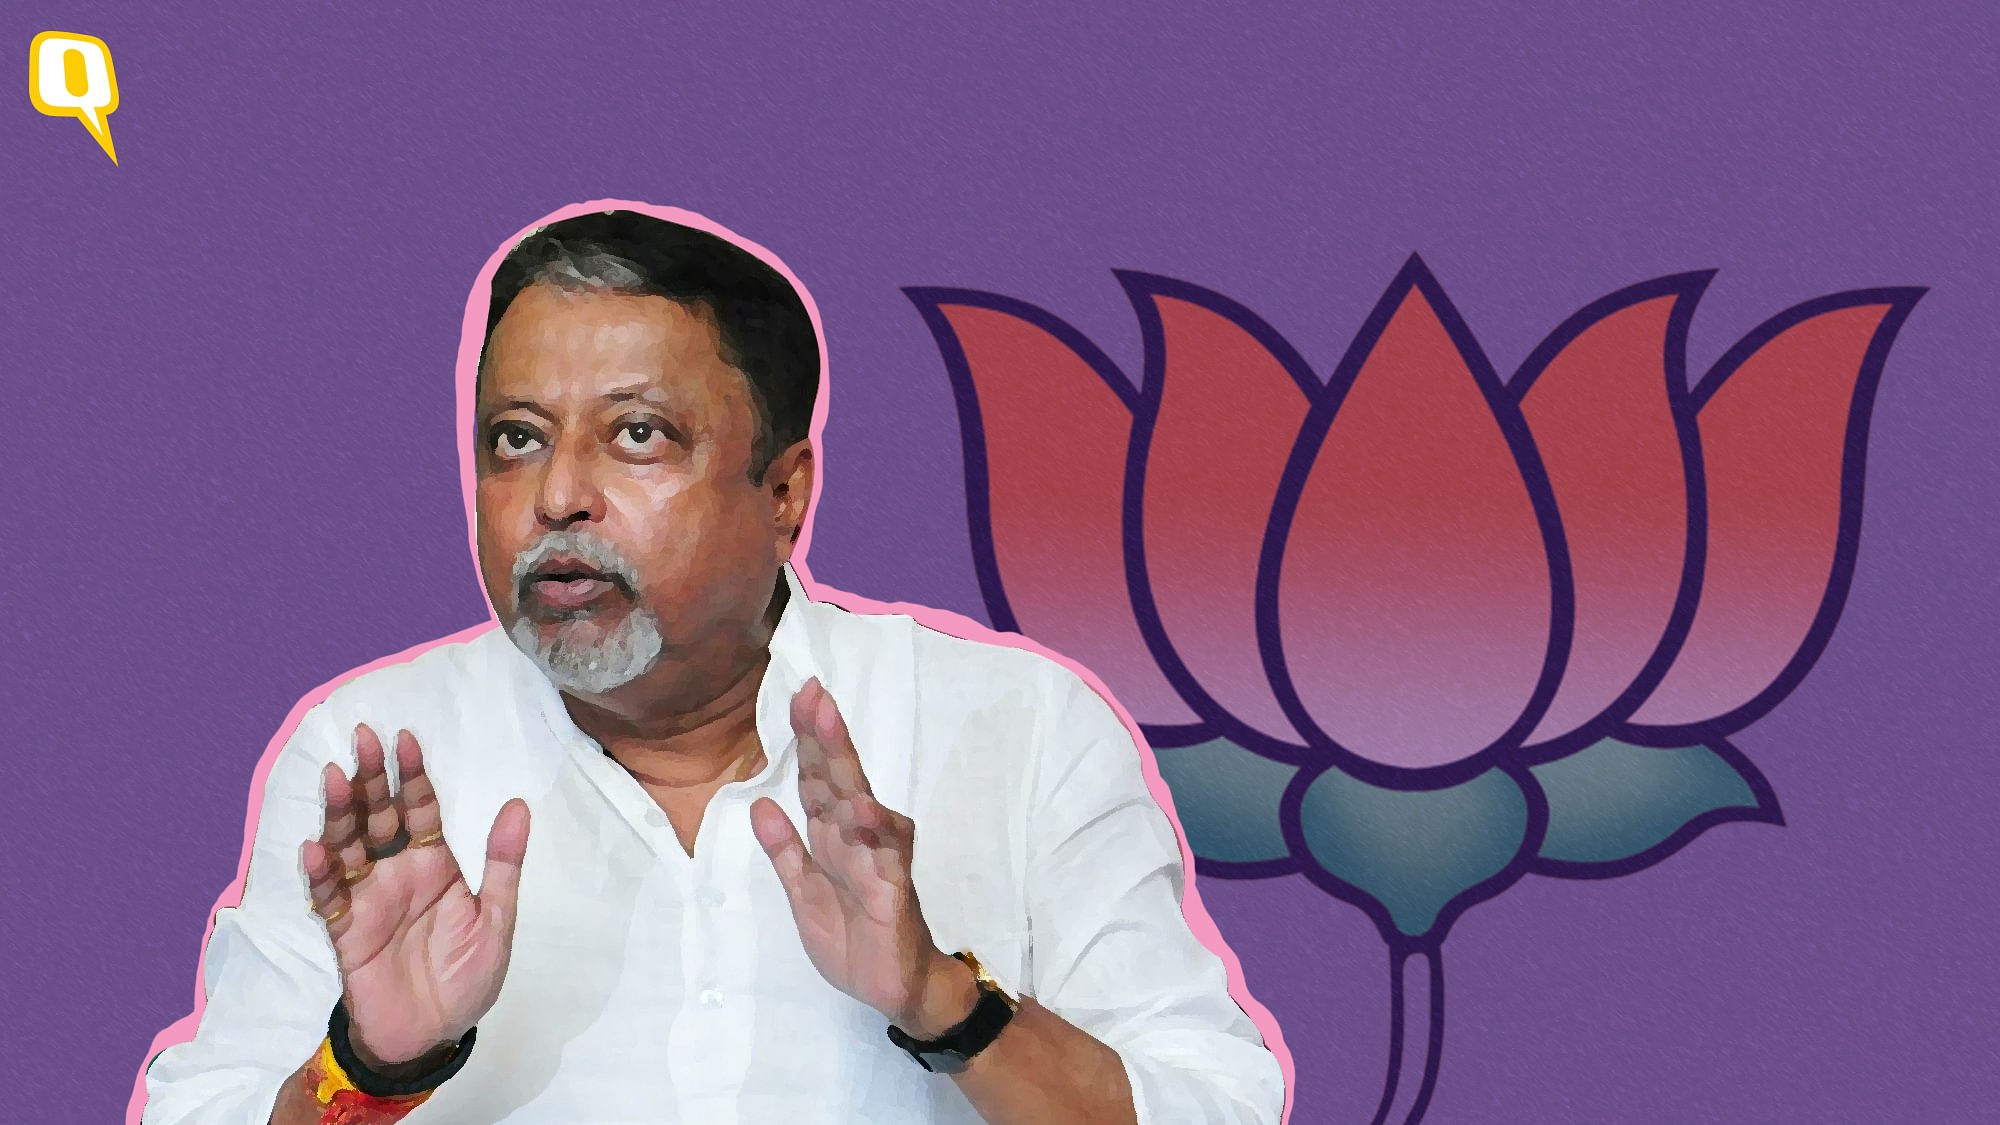 Mukul Roy, once no 2 in the Trinamool Congress, joined the BJP on 6 November.